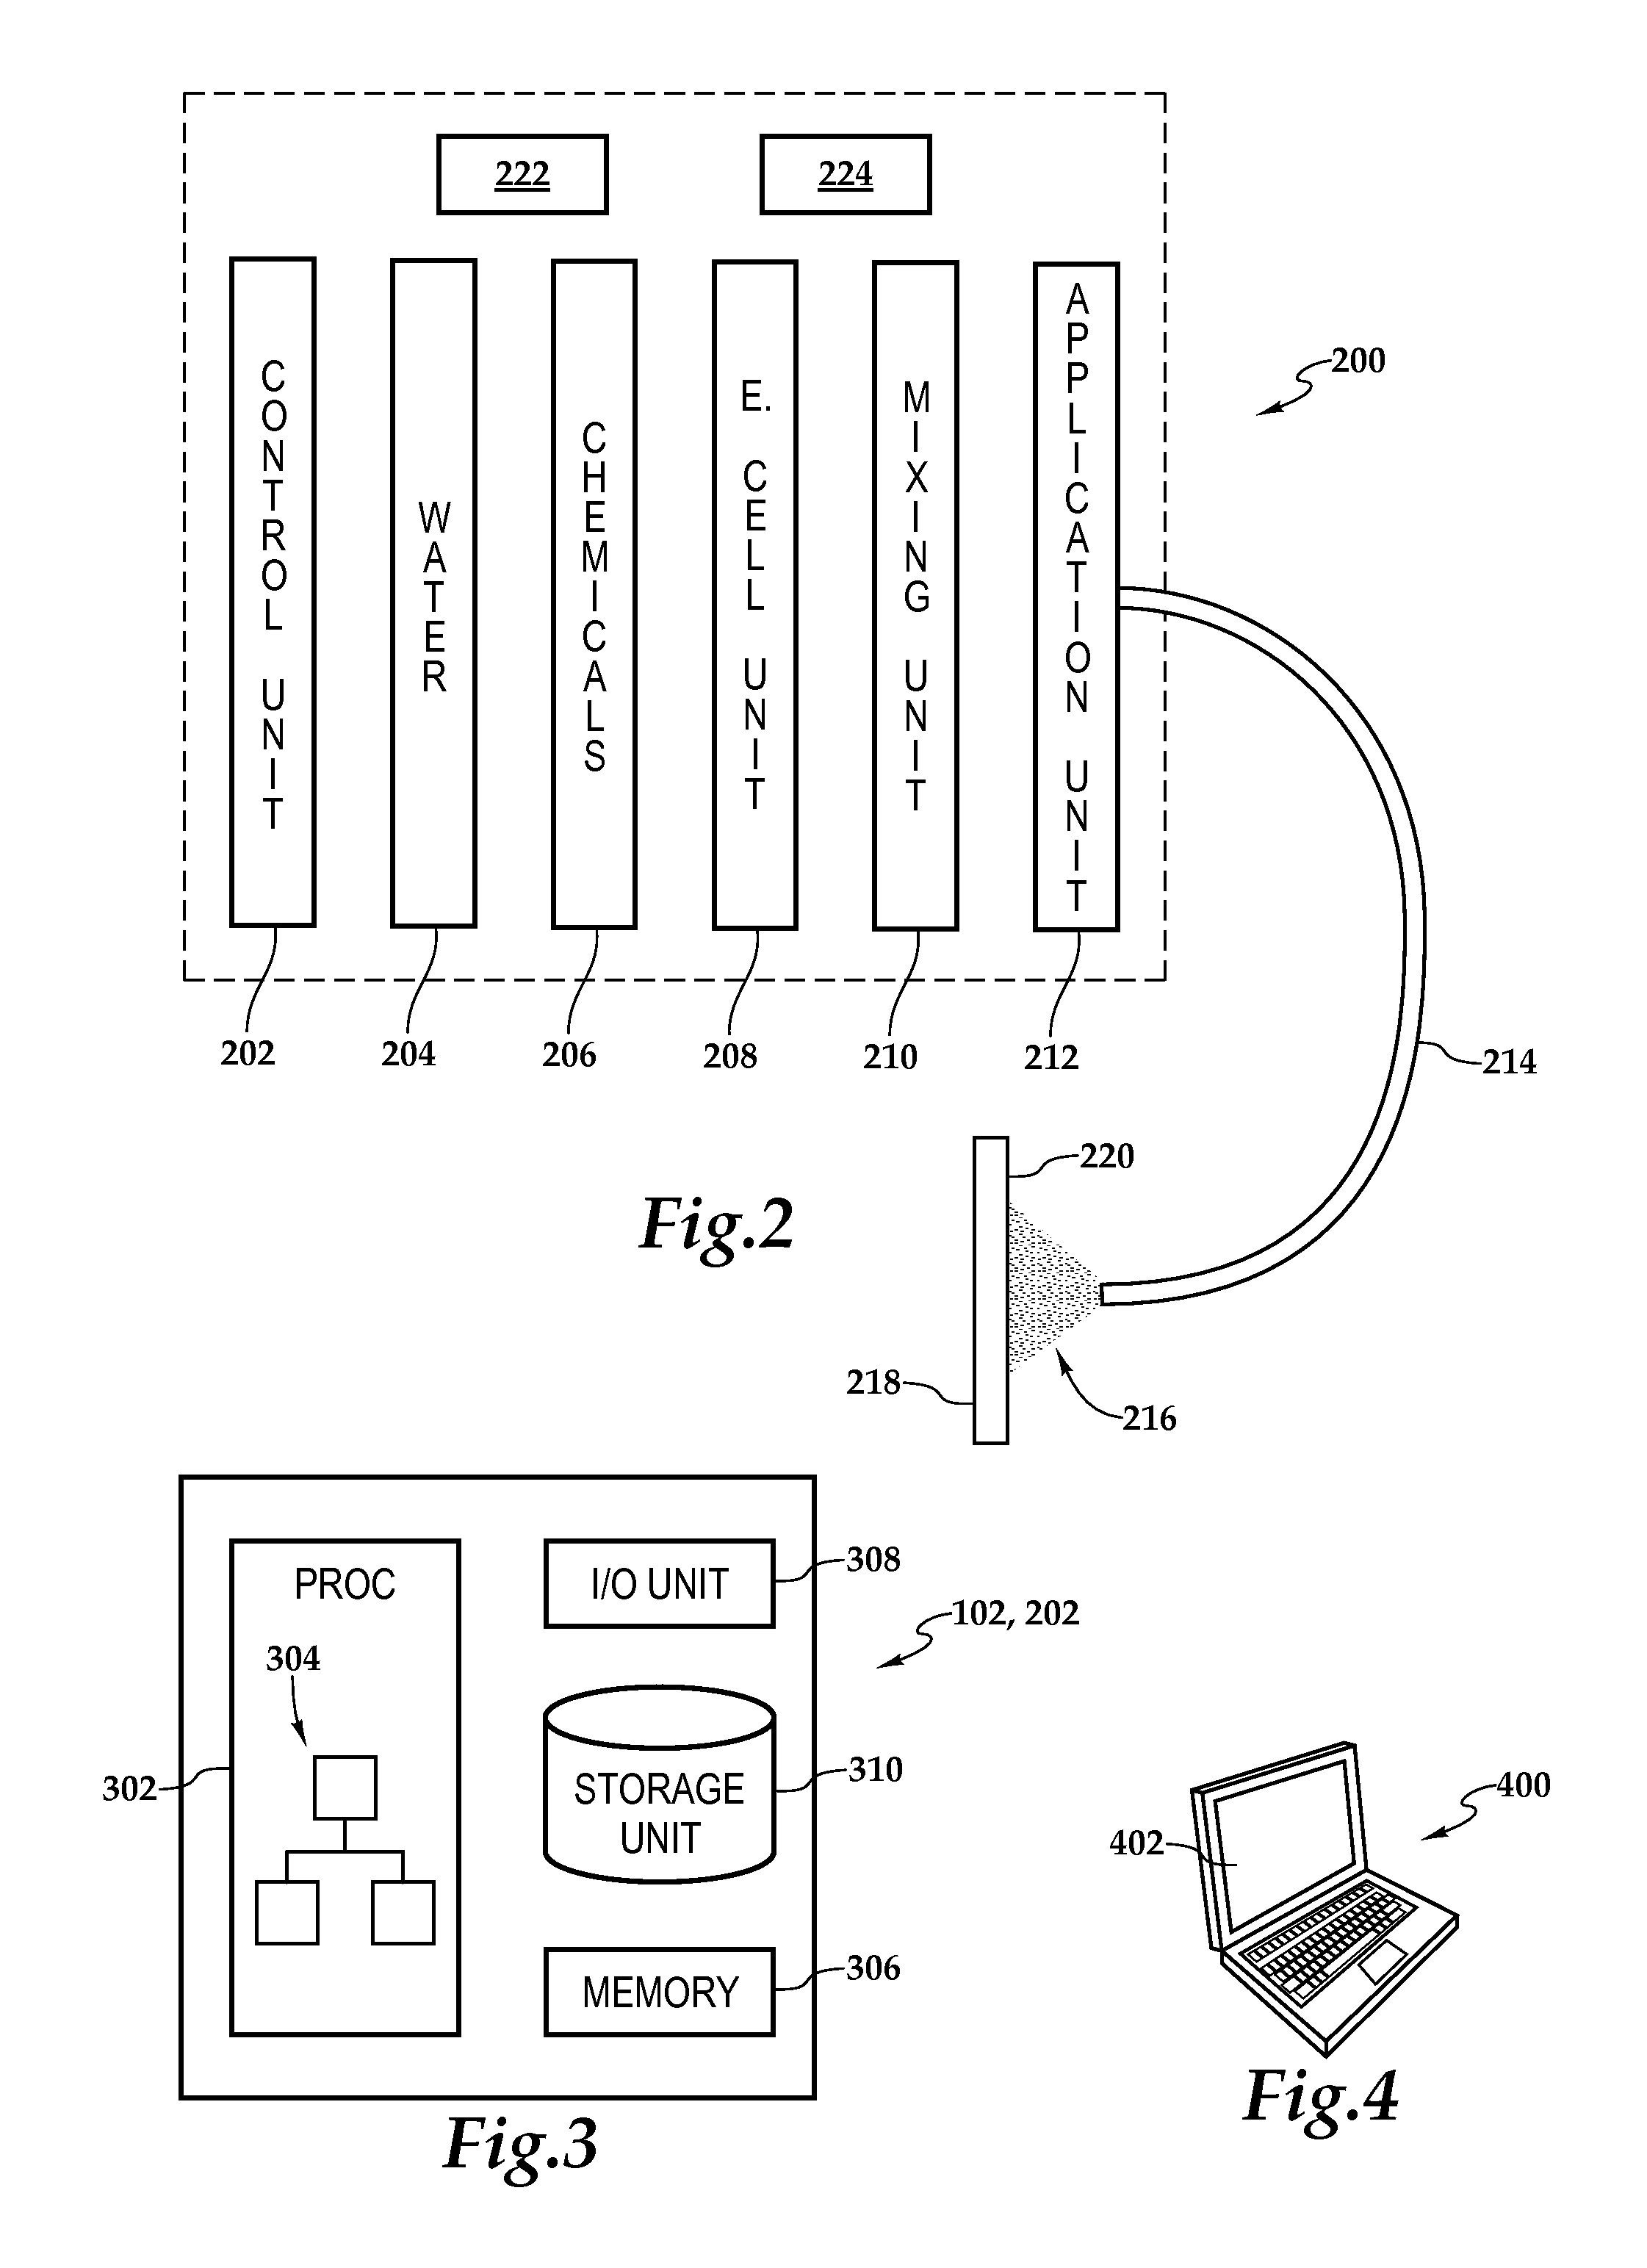 Electrolytic system and method for generating biocides having an electron deficient carrier fluid and chlorine dioxide